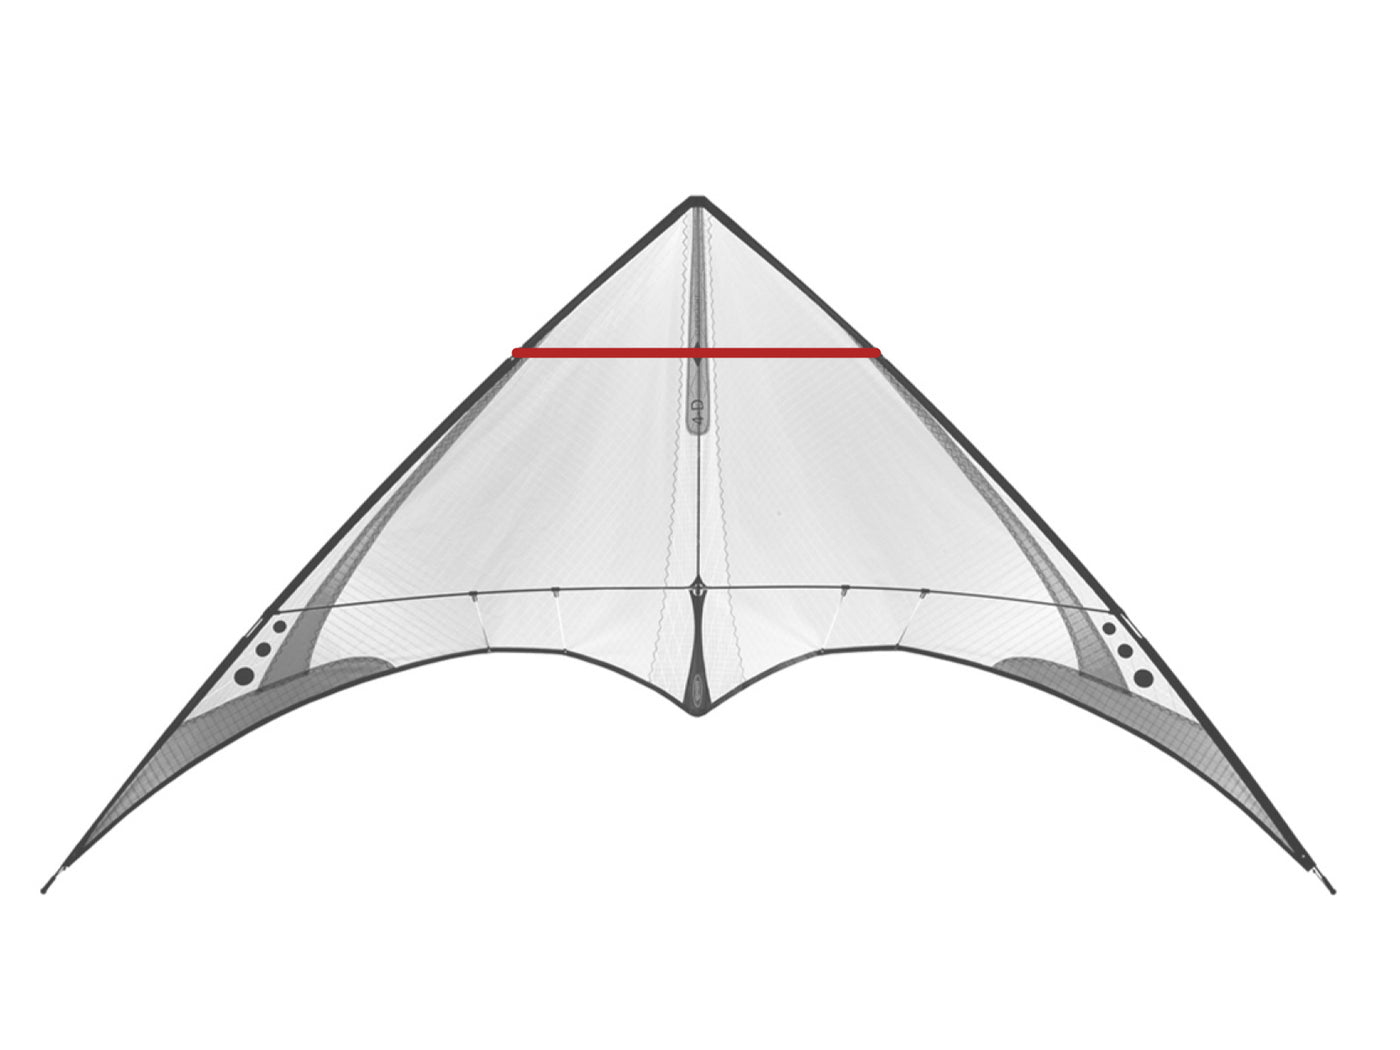 Diagram showing location of the 4-D Upper Spreader on the kite.